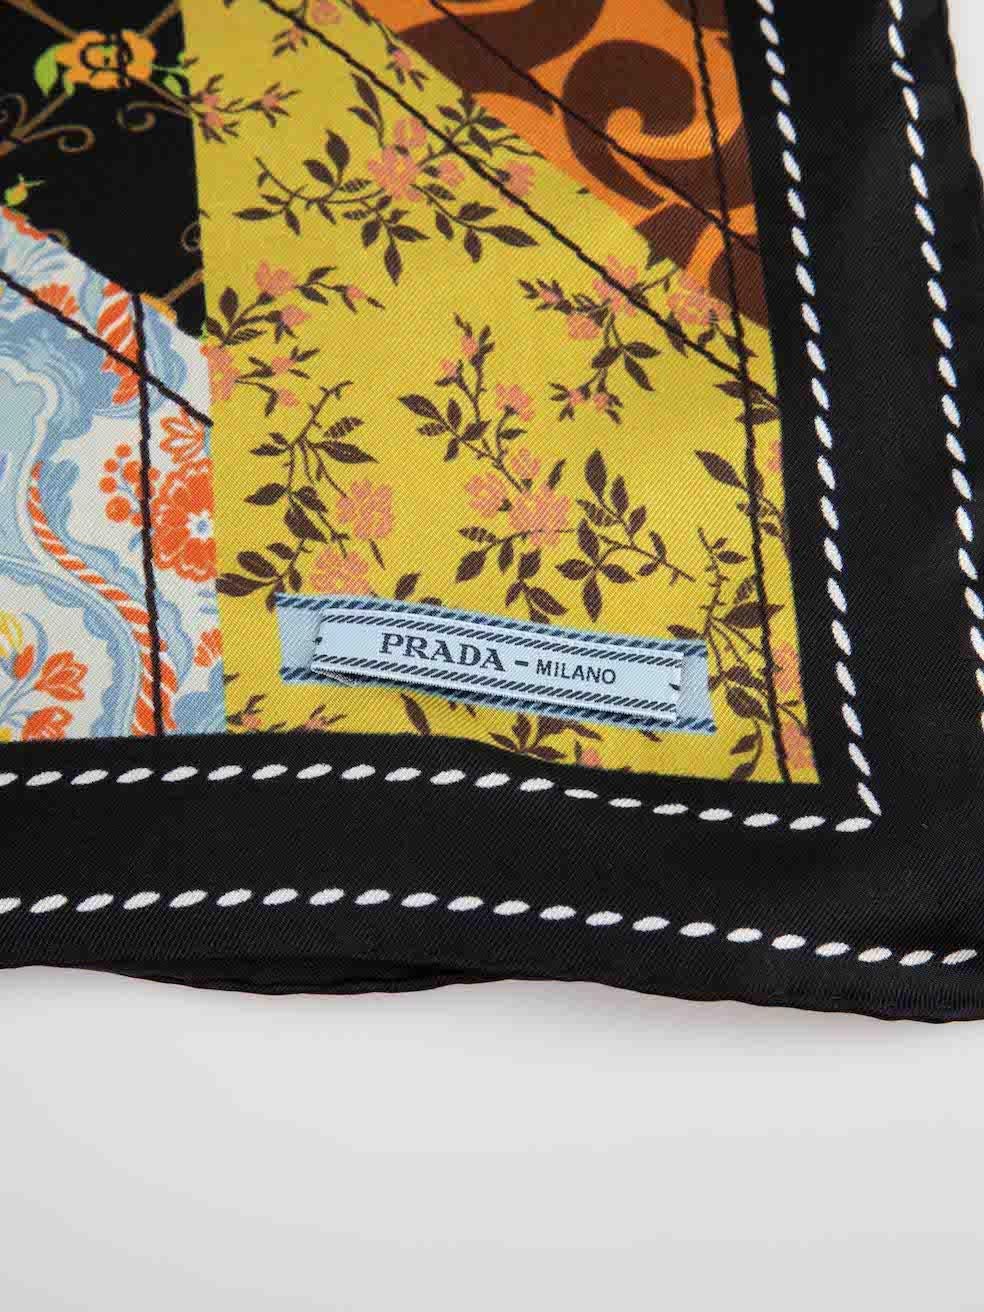 Prada Abstract Floral Silk Foulard Scarf In Excellent Condition For Sale In London, GB